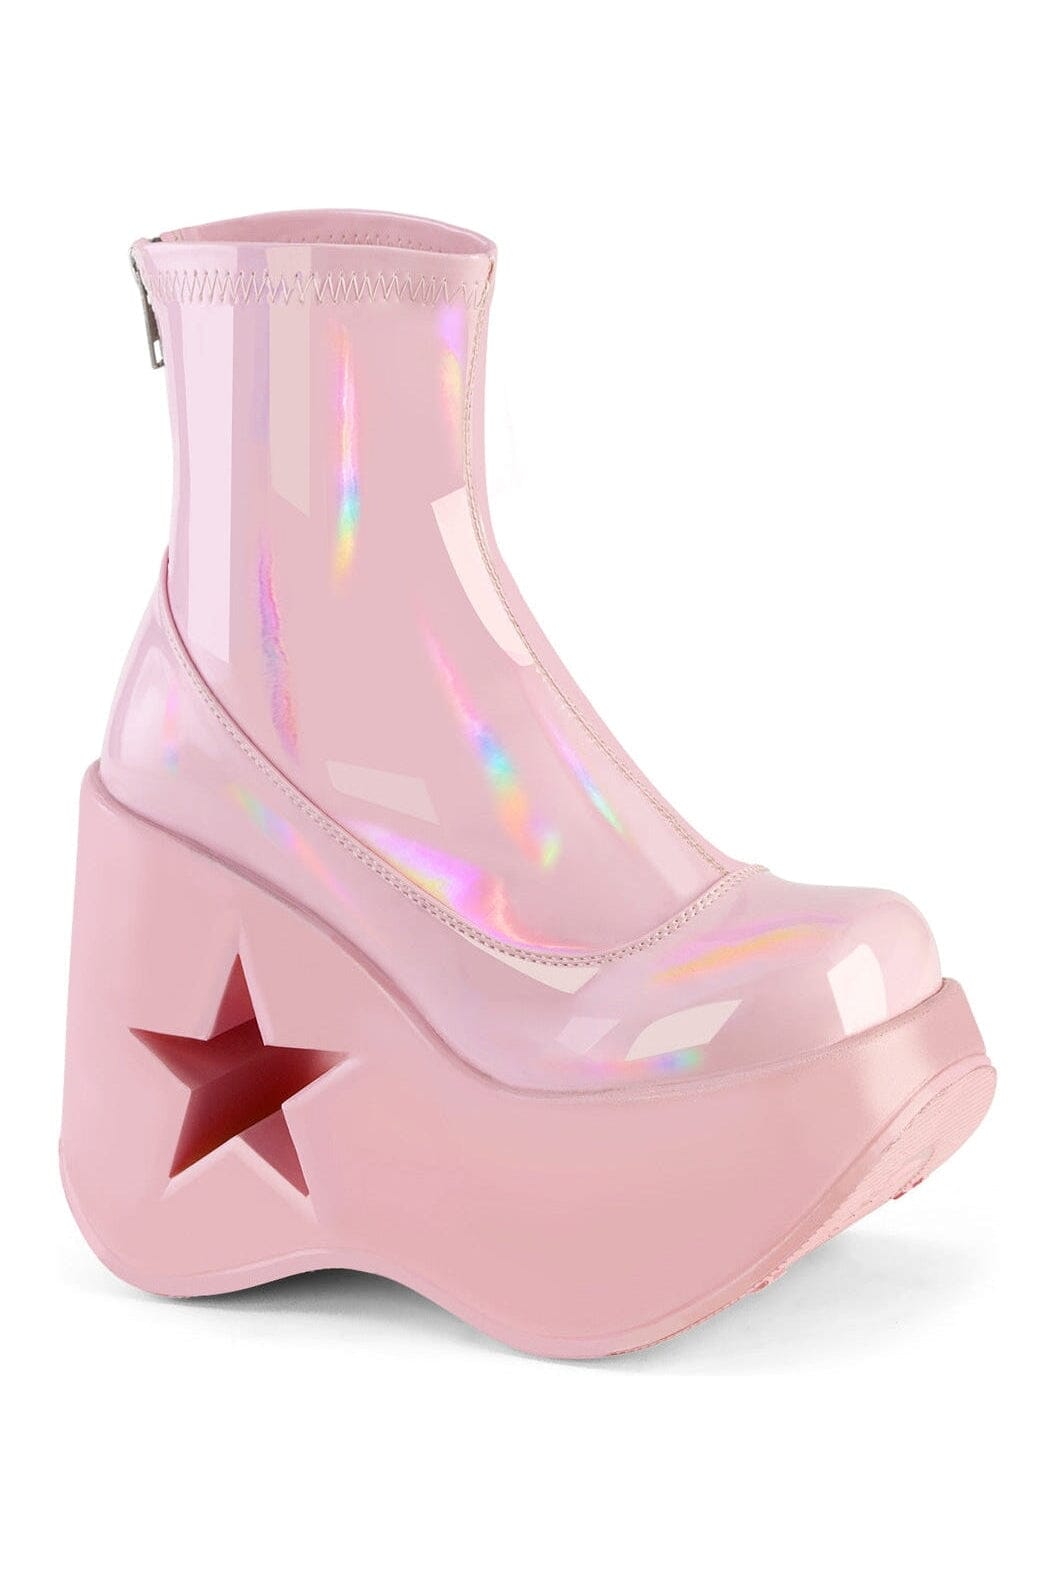 DYNAMITE-100 Pink Hologram Patent Ankle Boot-Ankle Boots-Demonia-Pink-10-Hologram Patent-SEXYSHOES.COM